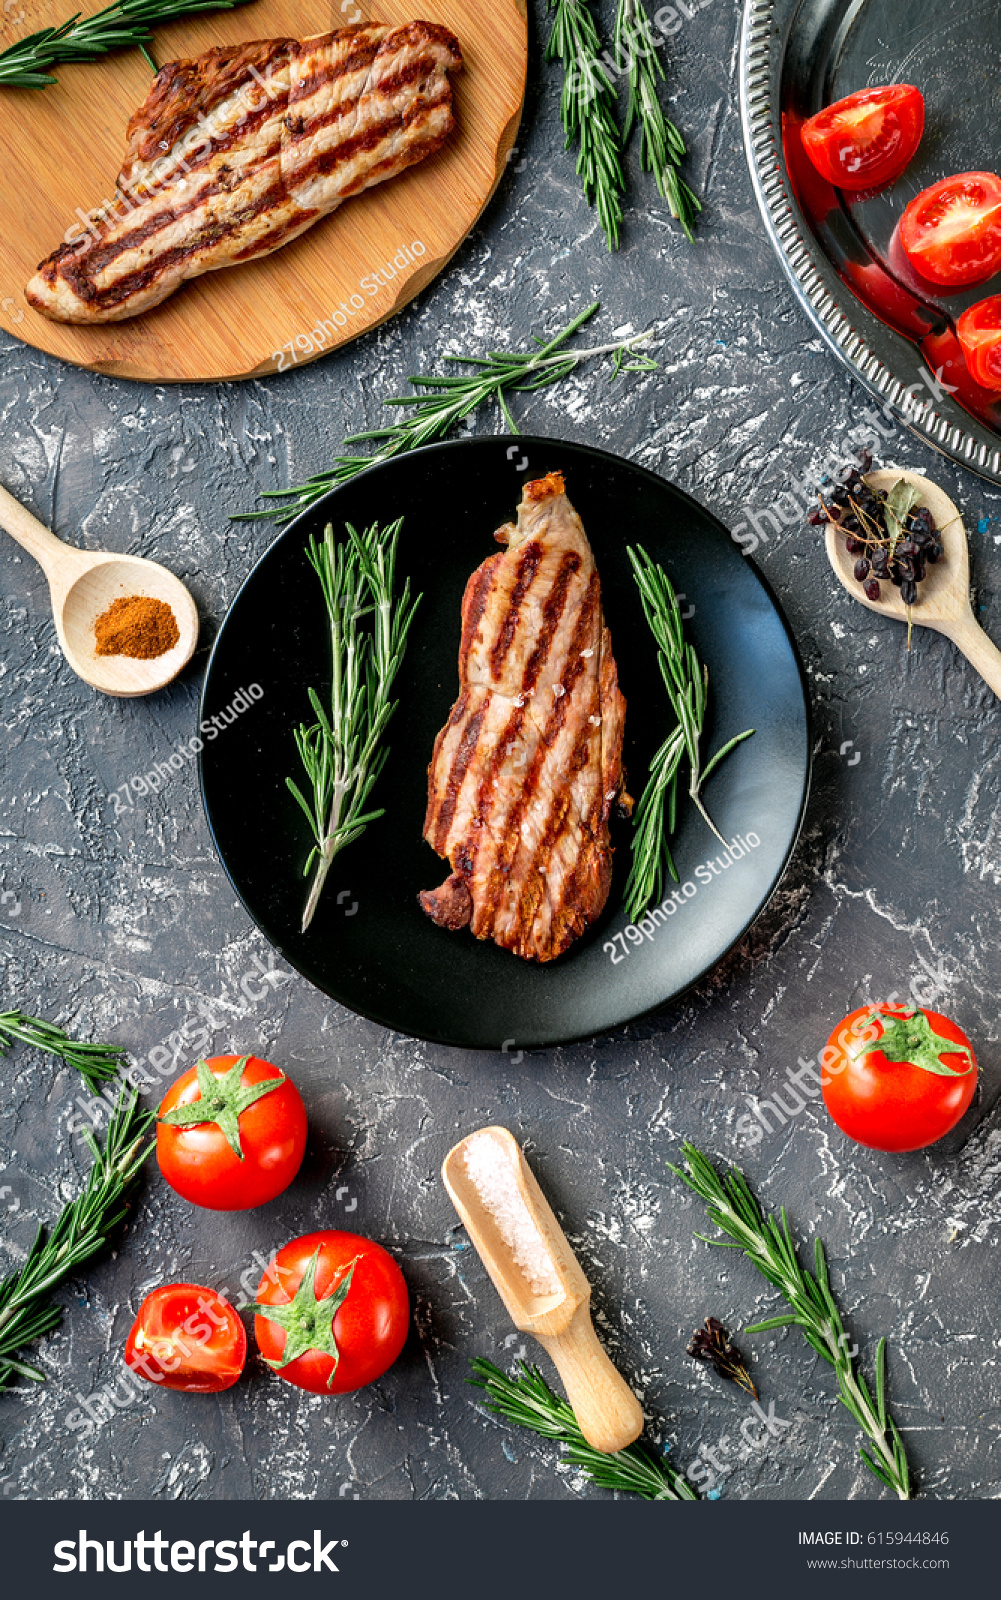 roasted meat in cooking steak concept gray background top view #615944846